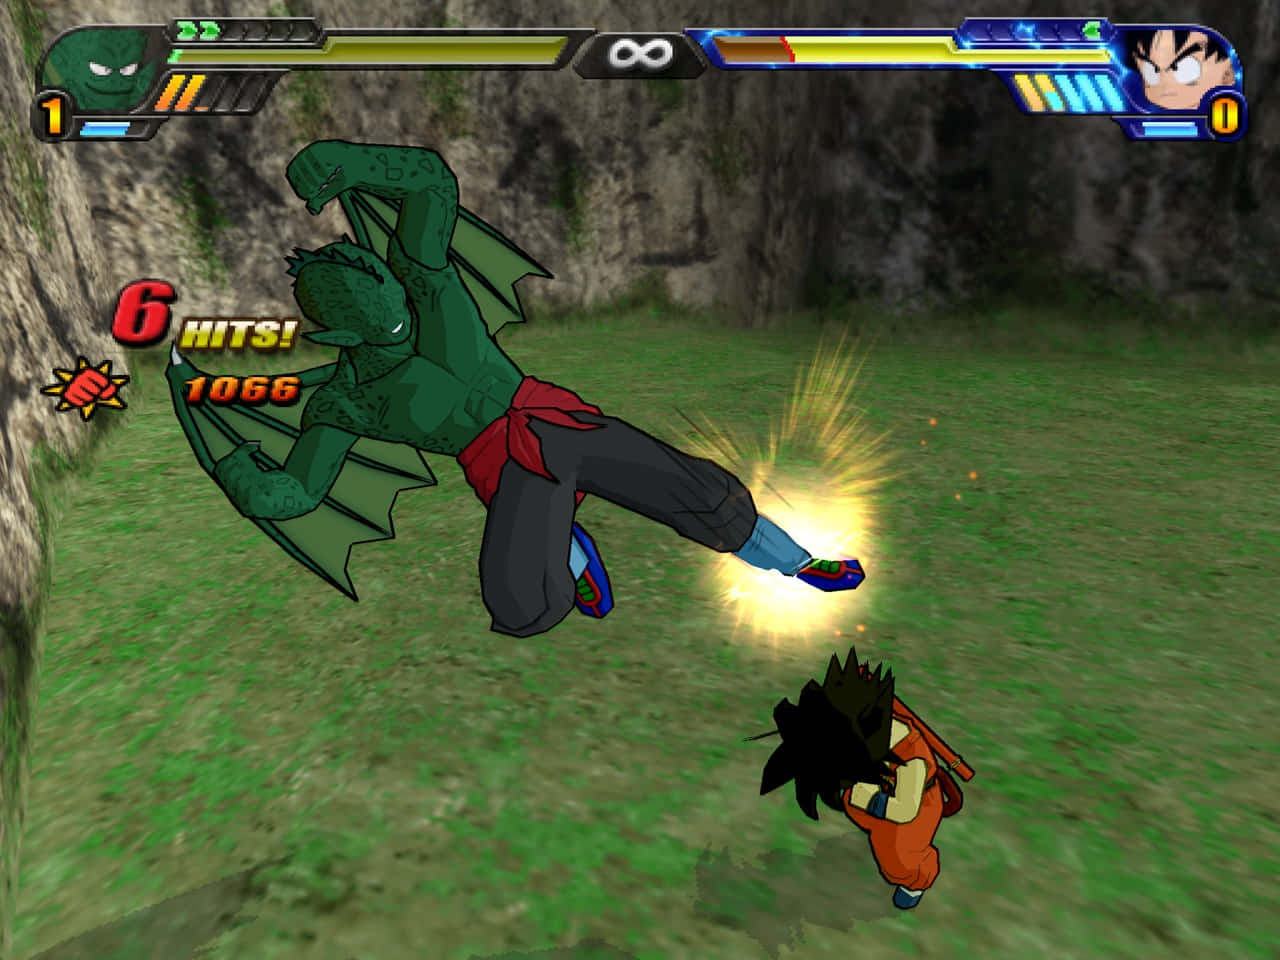 Fire up your gaming console and challenge your friends with Dbz Video Games! Wallpaper